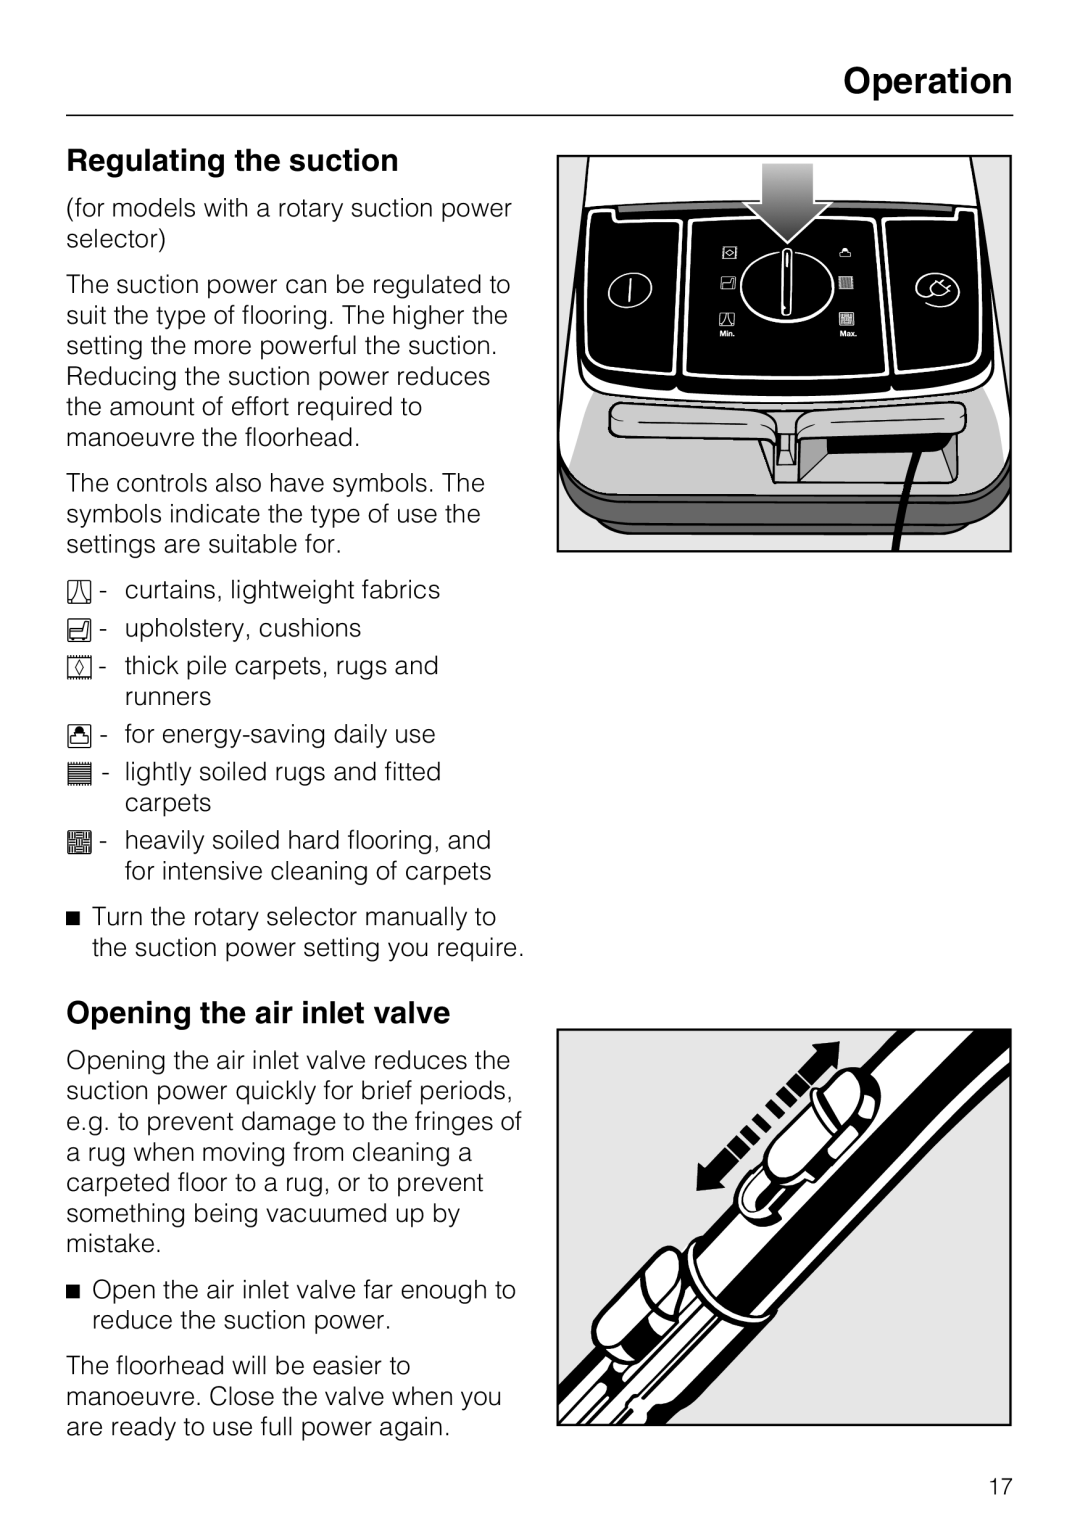 Miele S 388, S 360 manual Regulating the suction, Opening the air inlet valve, Operation 